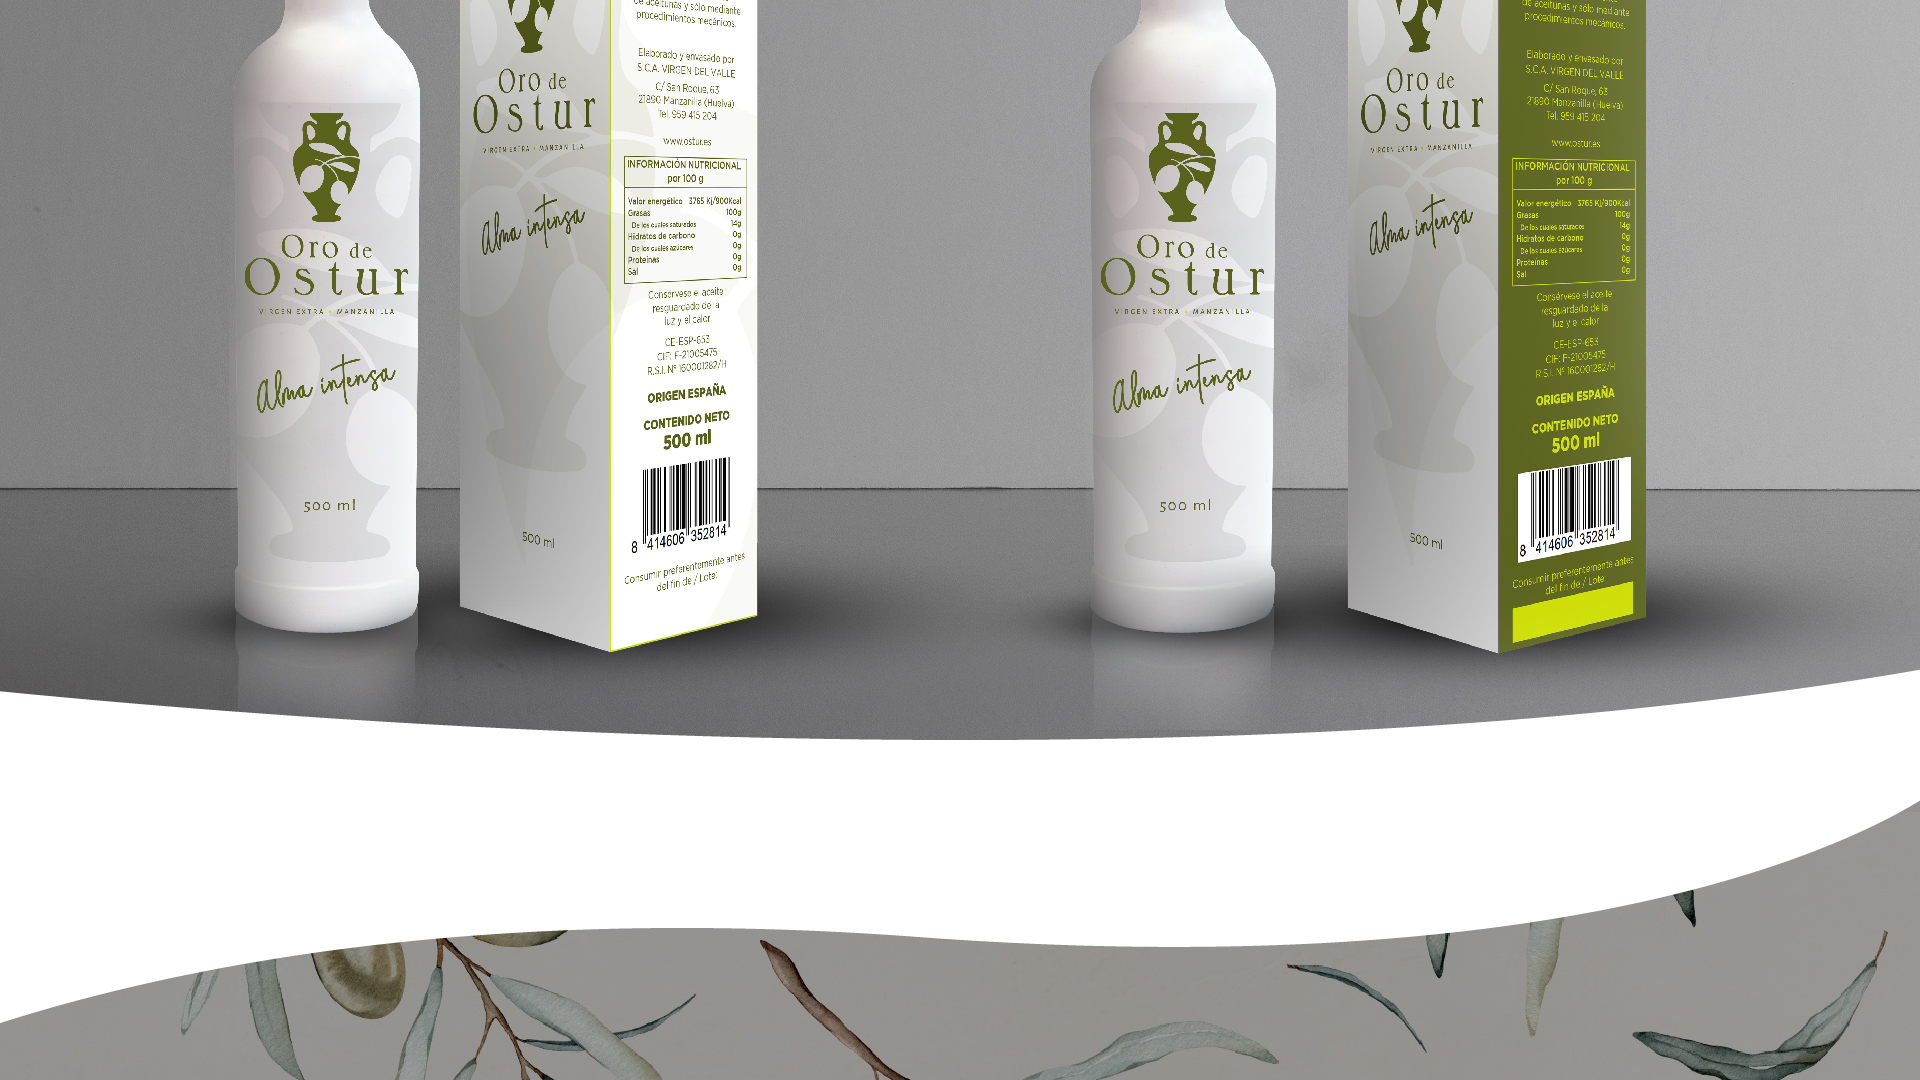 Graphic and creative design of extra virgin olive oil labels for ORO DE OSTUR